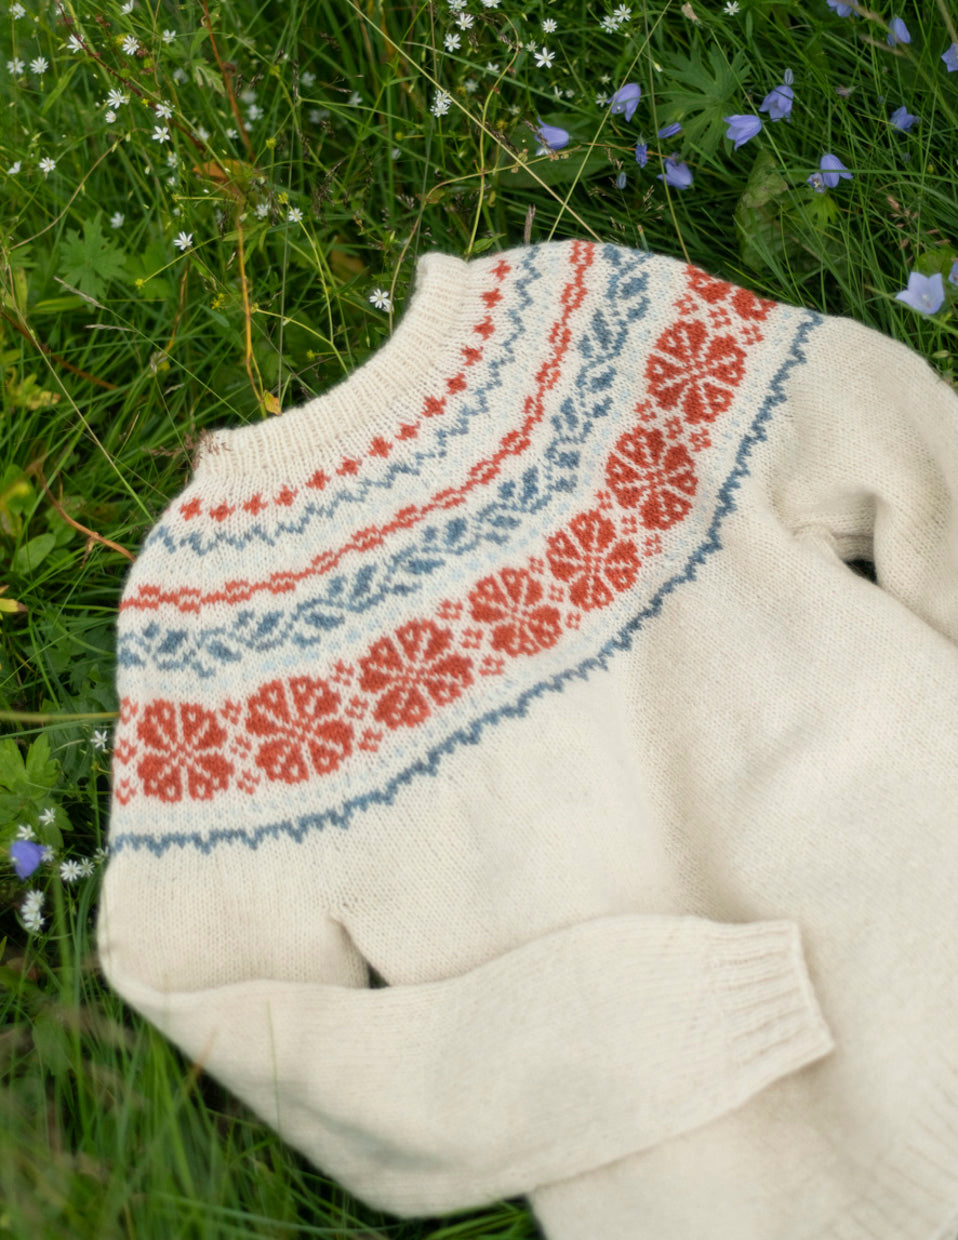 Markens Grøde (The Growth of the Field) 2 ply Uttakleiv with plant-dyed yarn, knitting kit